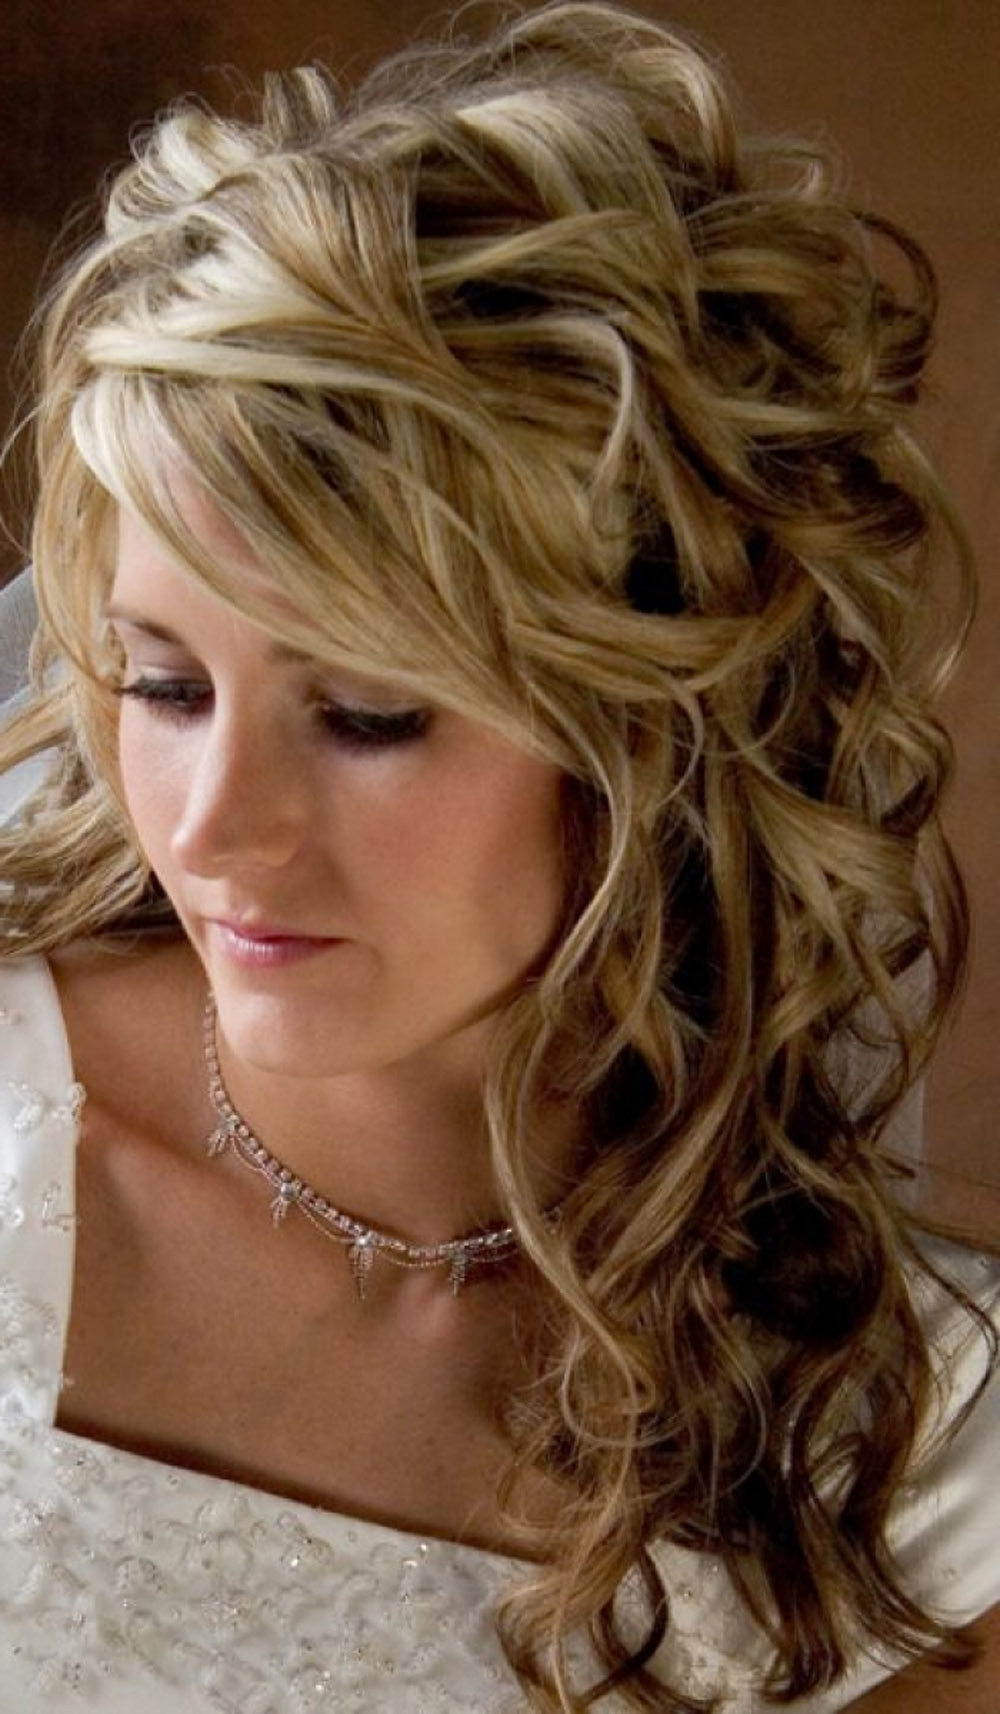 Prom Hairstyles Curled Hair
 20 Unique Prom Hairstyles Ideas With MagMent